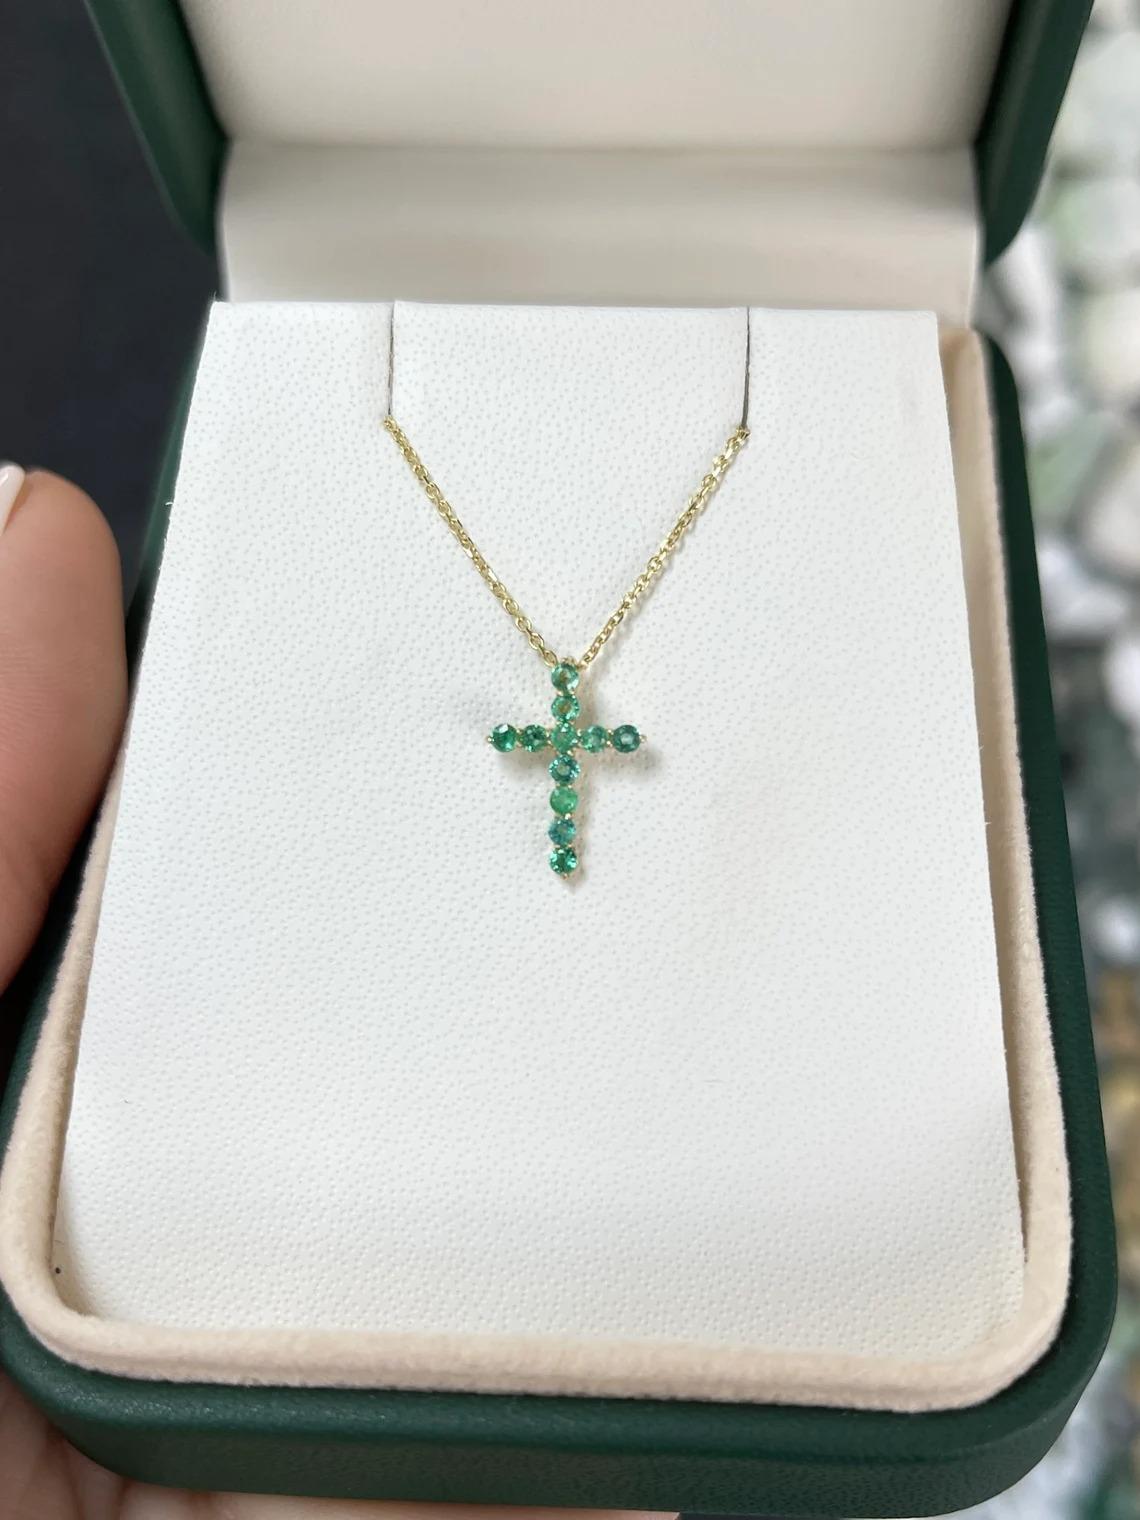 A token of faith, a symbolic emerald cross. This petite pendant features numerous bluish-green emeralds, prong-set in a simple yet beautiful gold prong setting. Crafted in 14K gold, and ideal for everyday wear and stacking.

*Chain sold separately.